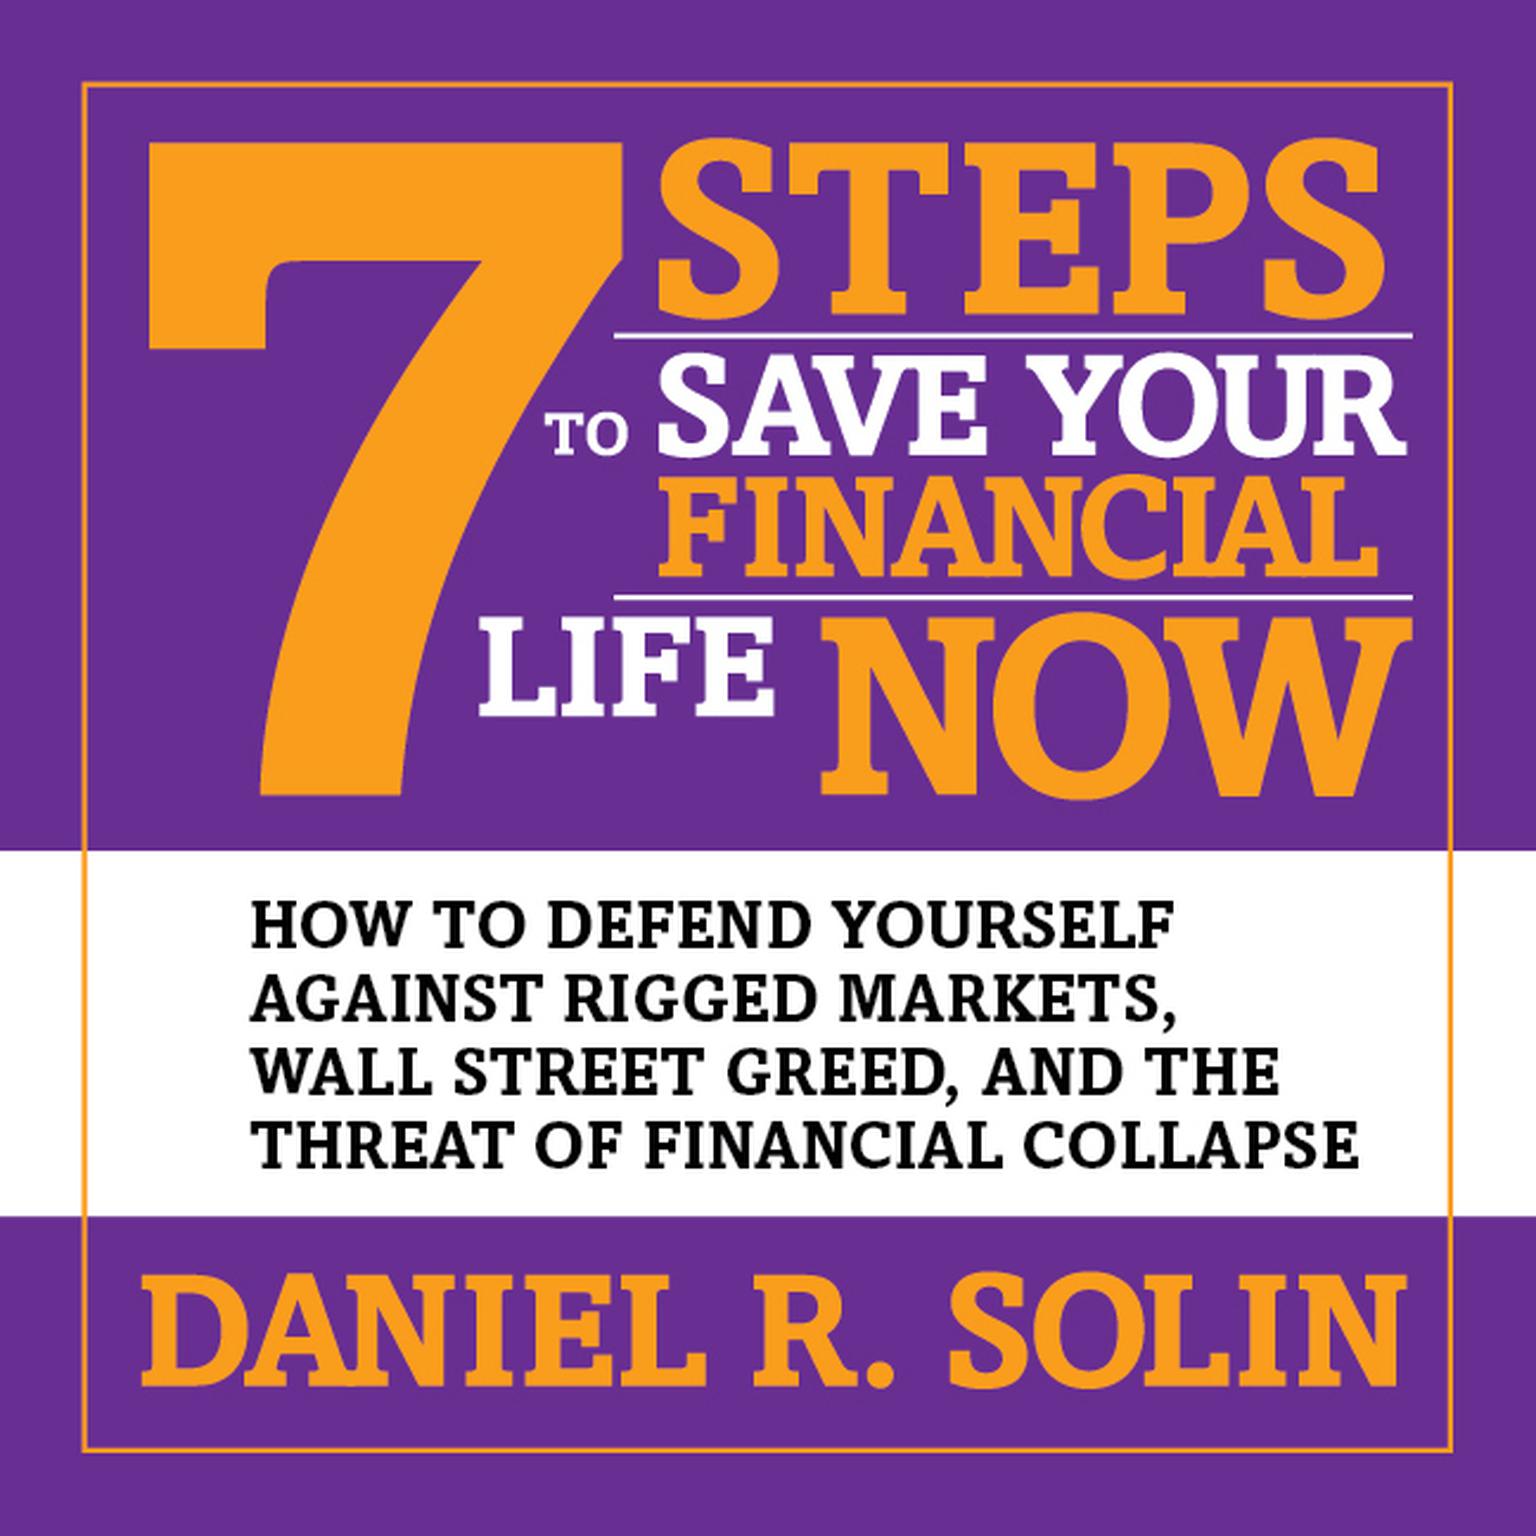 7 Steps to Save Your Financial Life Now: How to Defend Yourself Against Rigged Markets, Wall Street Greed, and the Threat of Financial Collapse Audiobook, by Daniel R. Solin